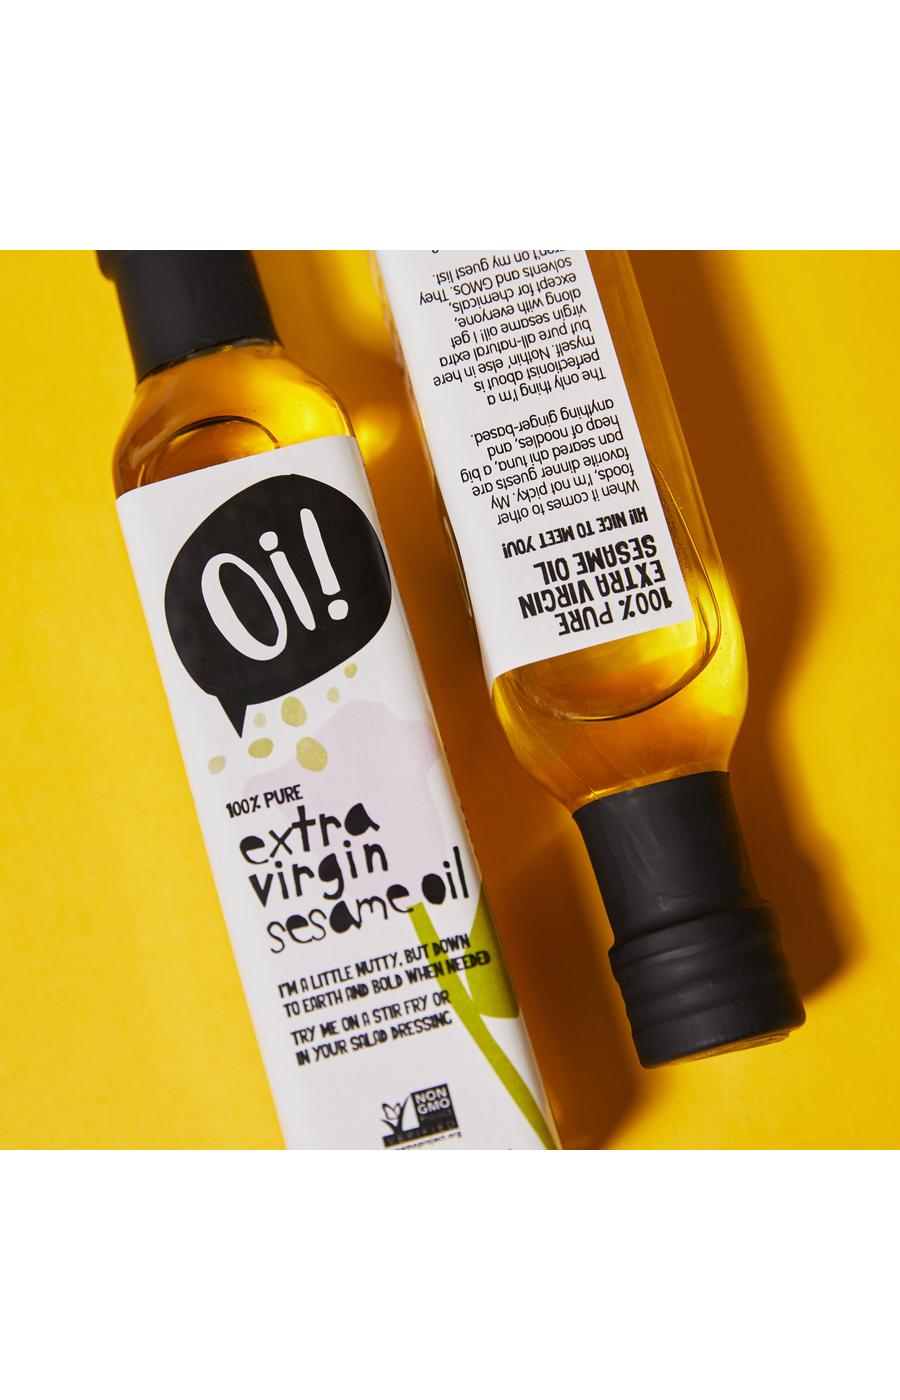 Oi! 100% Pure Extra Virgin Sesame Oil; image 4 of 4